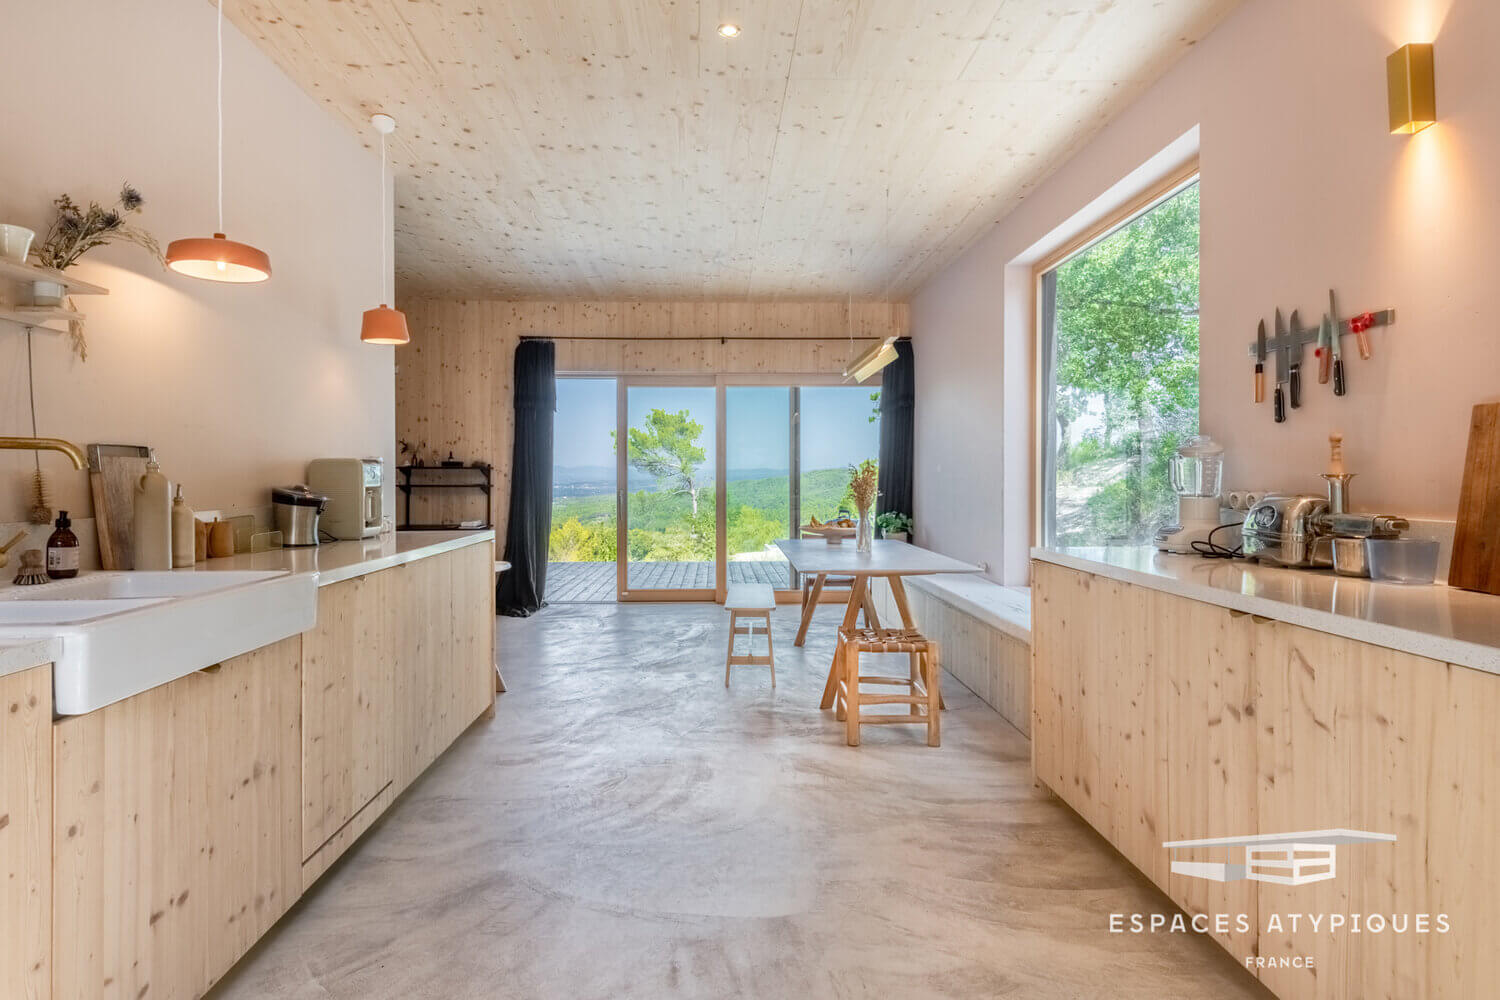 AMinimalisticWoodenHomewithAmazingViewsovertheProvenceCountryside TheNordroom2 A Minimalistic Wooden Home Overlooking the Provence Countryside